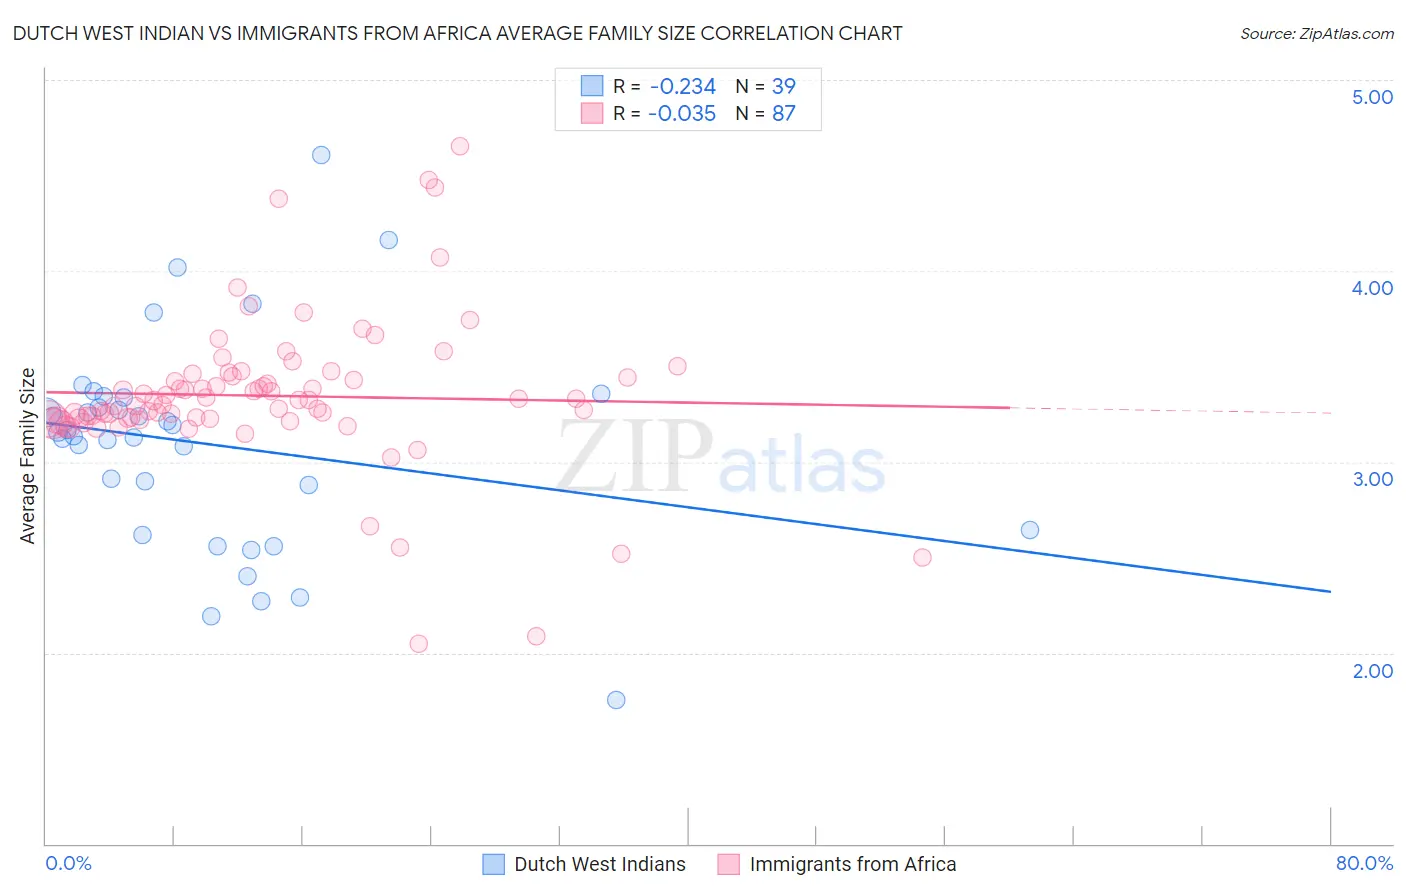 Dutch West Indian vs Immigrants from Africa Average Family Size